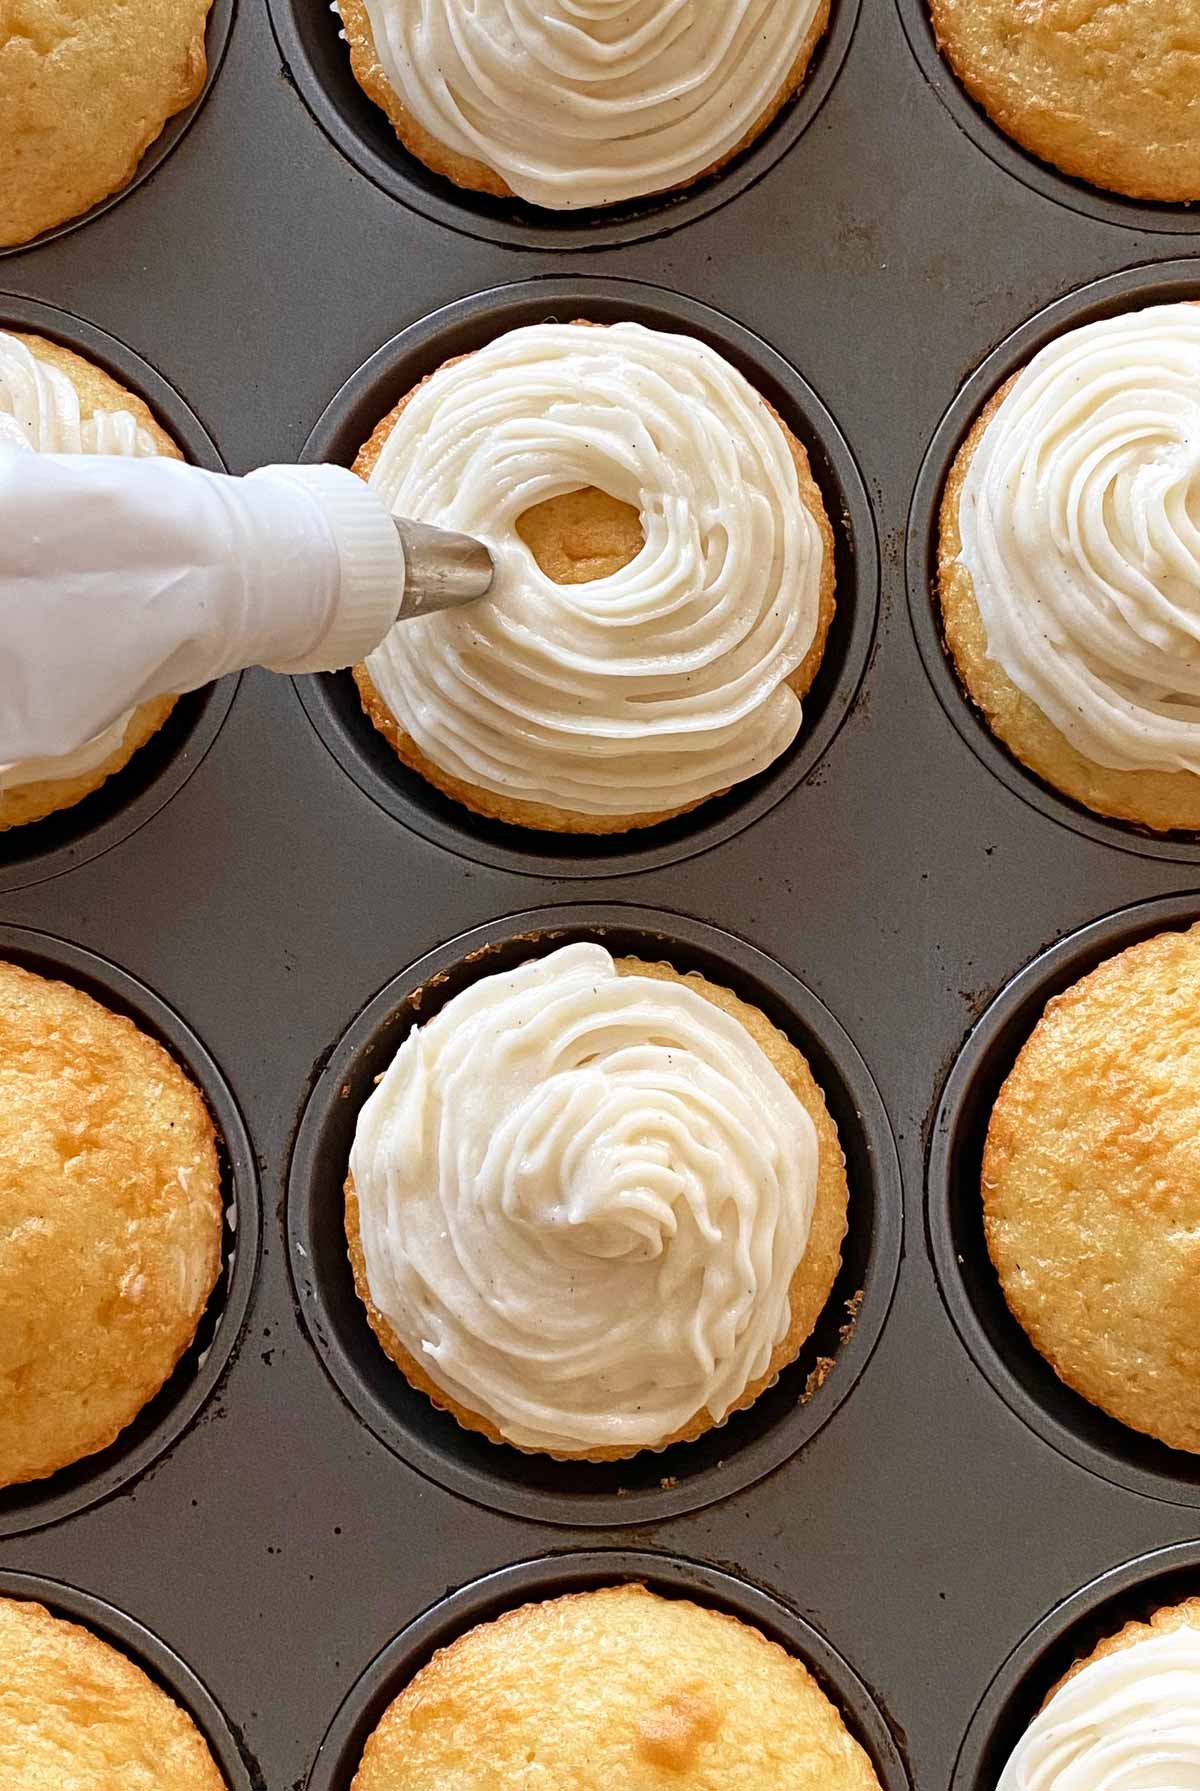 Piping frosting on a cupcake using a pastry bag.